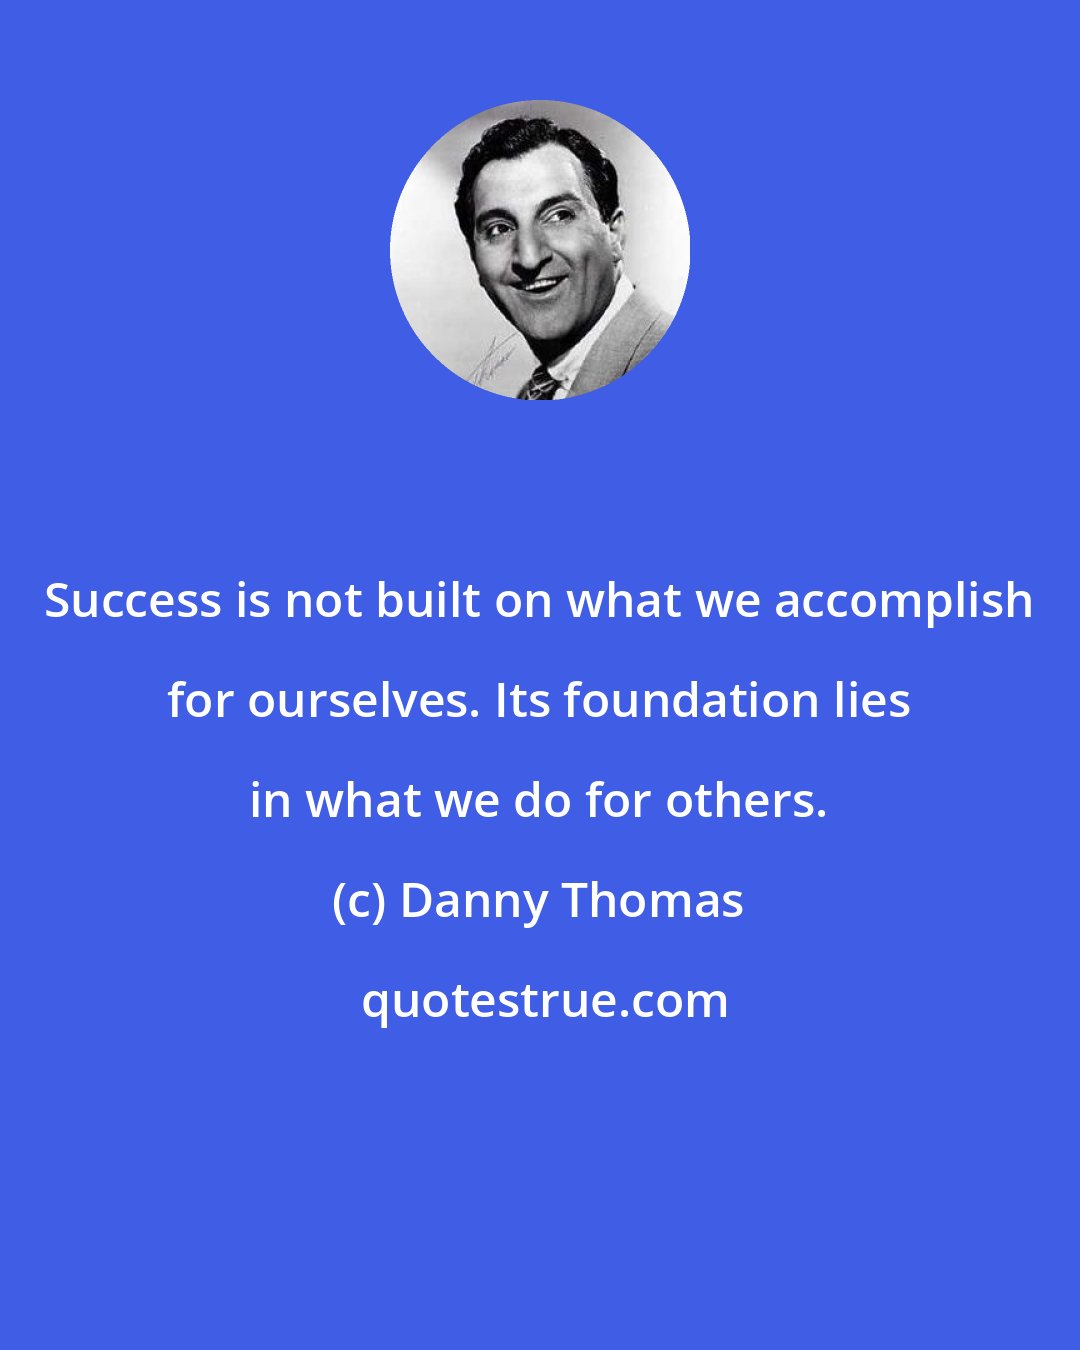 Danny Thomas: Success is not built on what we accomplish for ourselves. Its foundation lies in what we do for others.